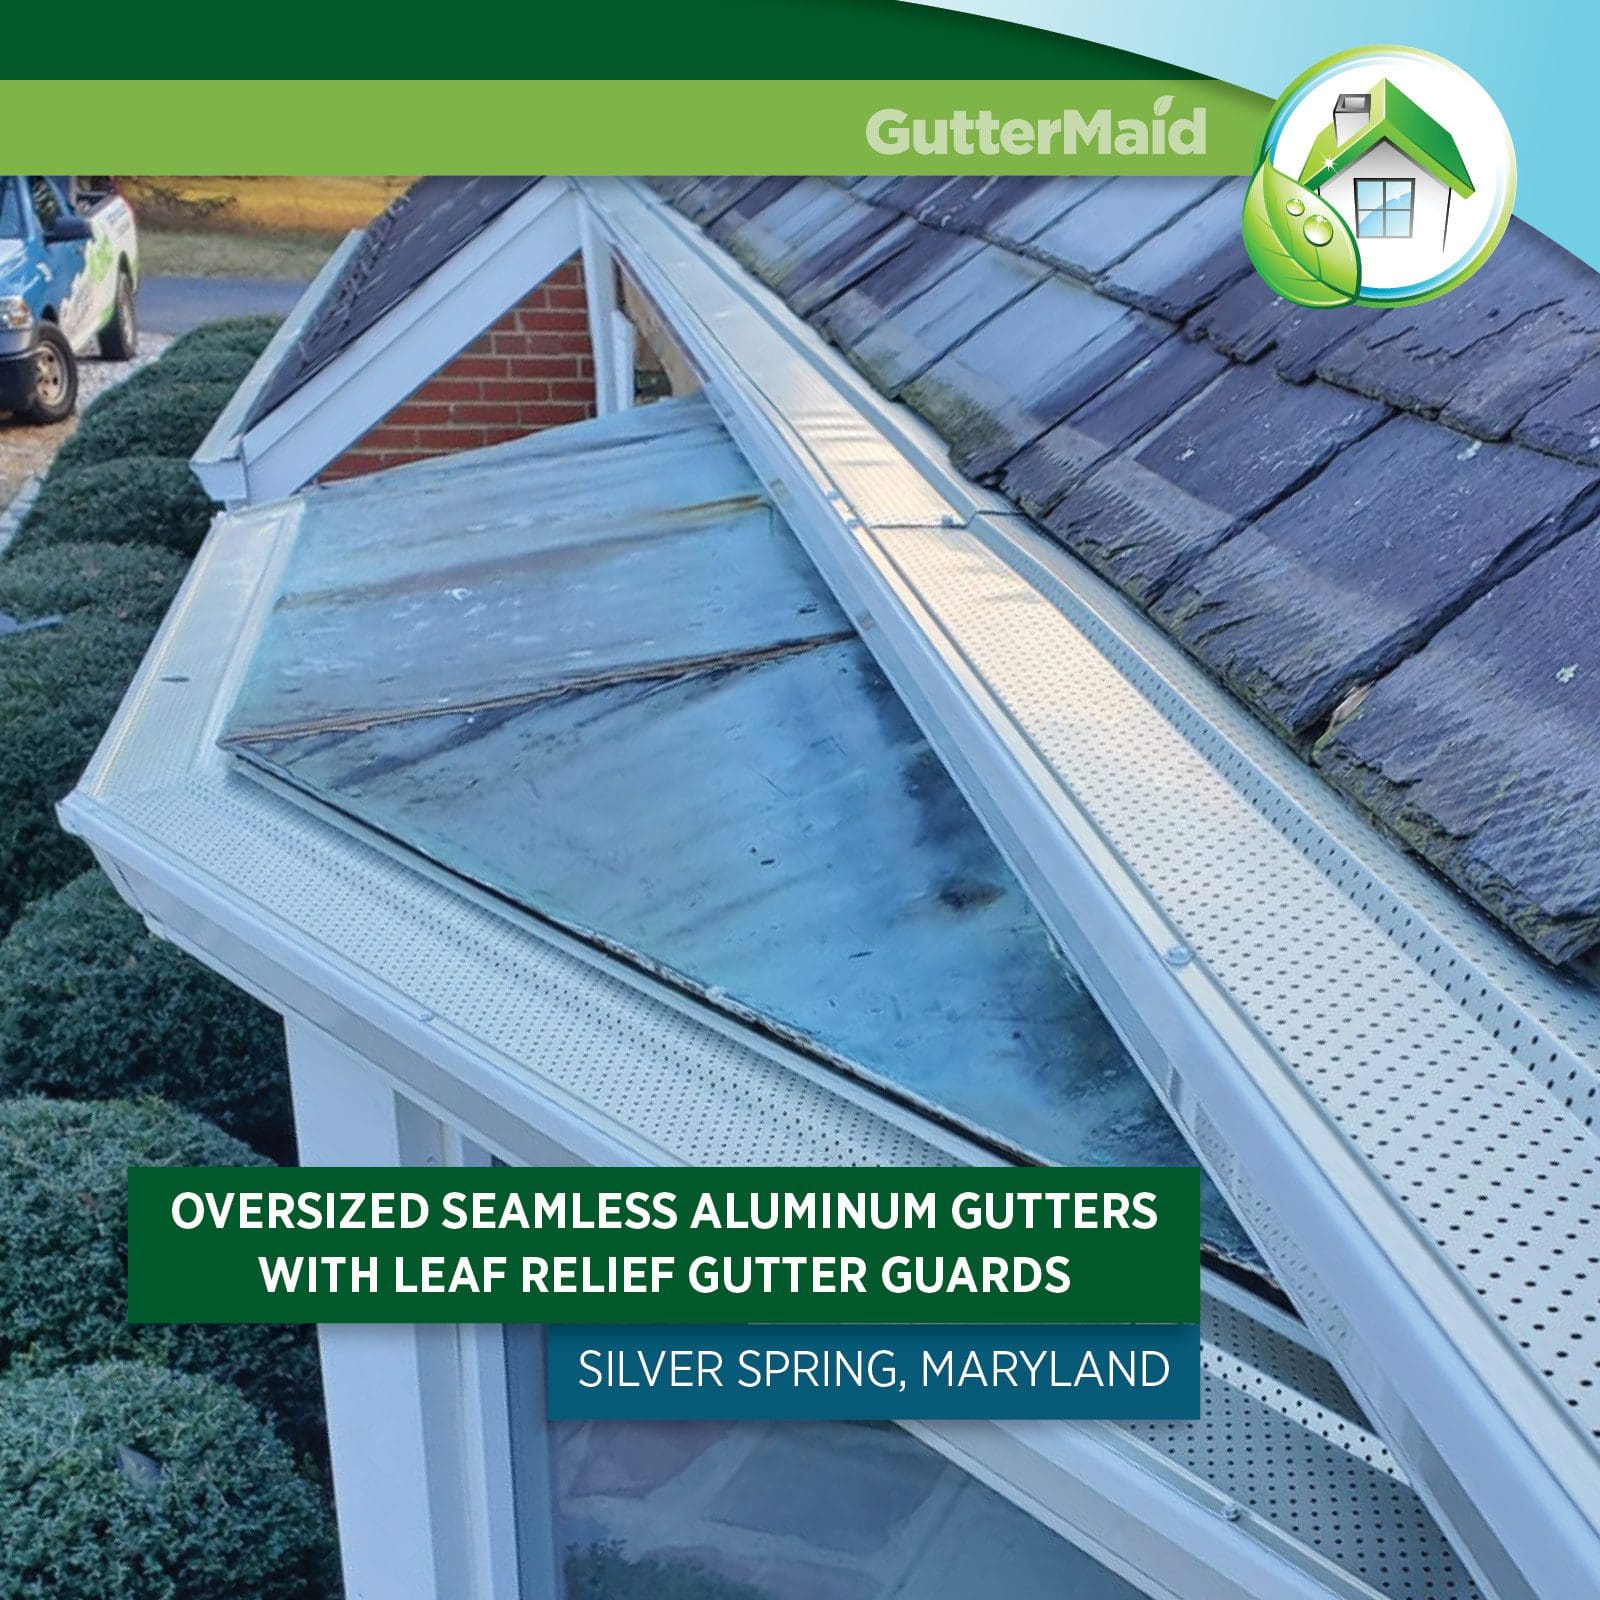 Oversize seamless aluminum gutters with leaf relief gutter guards in silver spring maryland